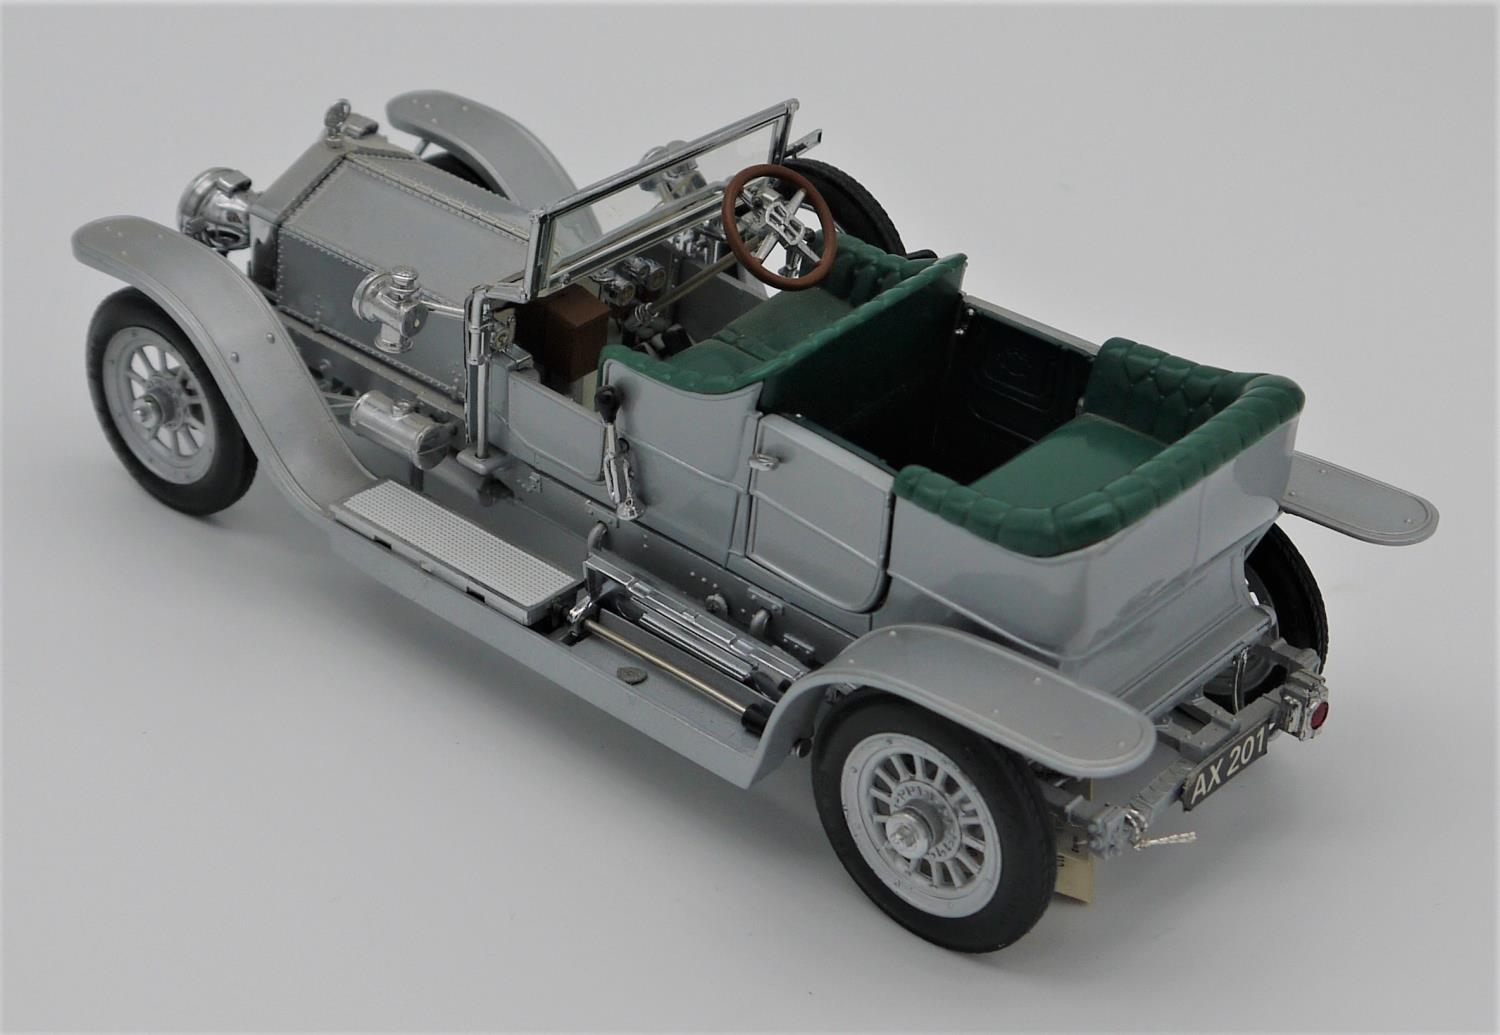 1907 ROLLS ROYCE SILVER GHOST TOURER BY FRANKLIN MINT 1:24 scale model of the best touring car of - Image 2 of 2